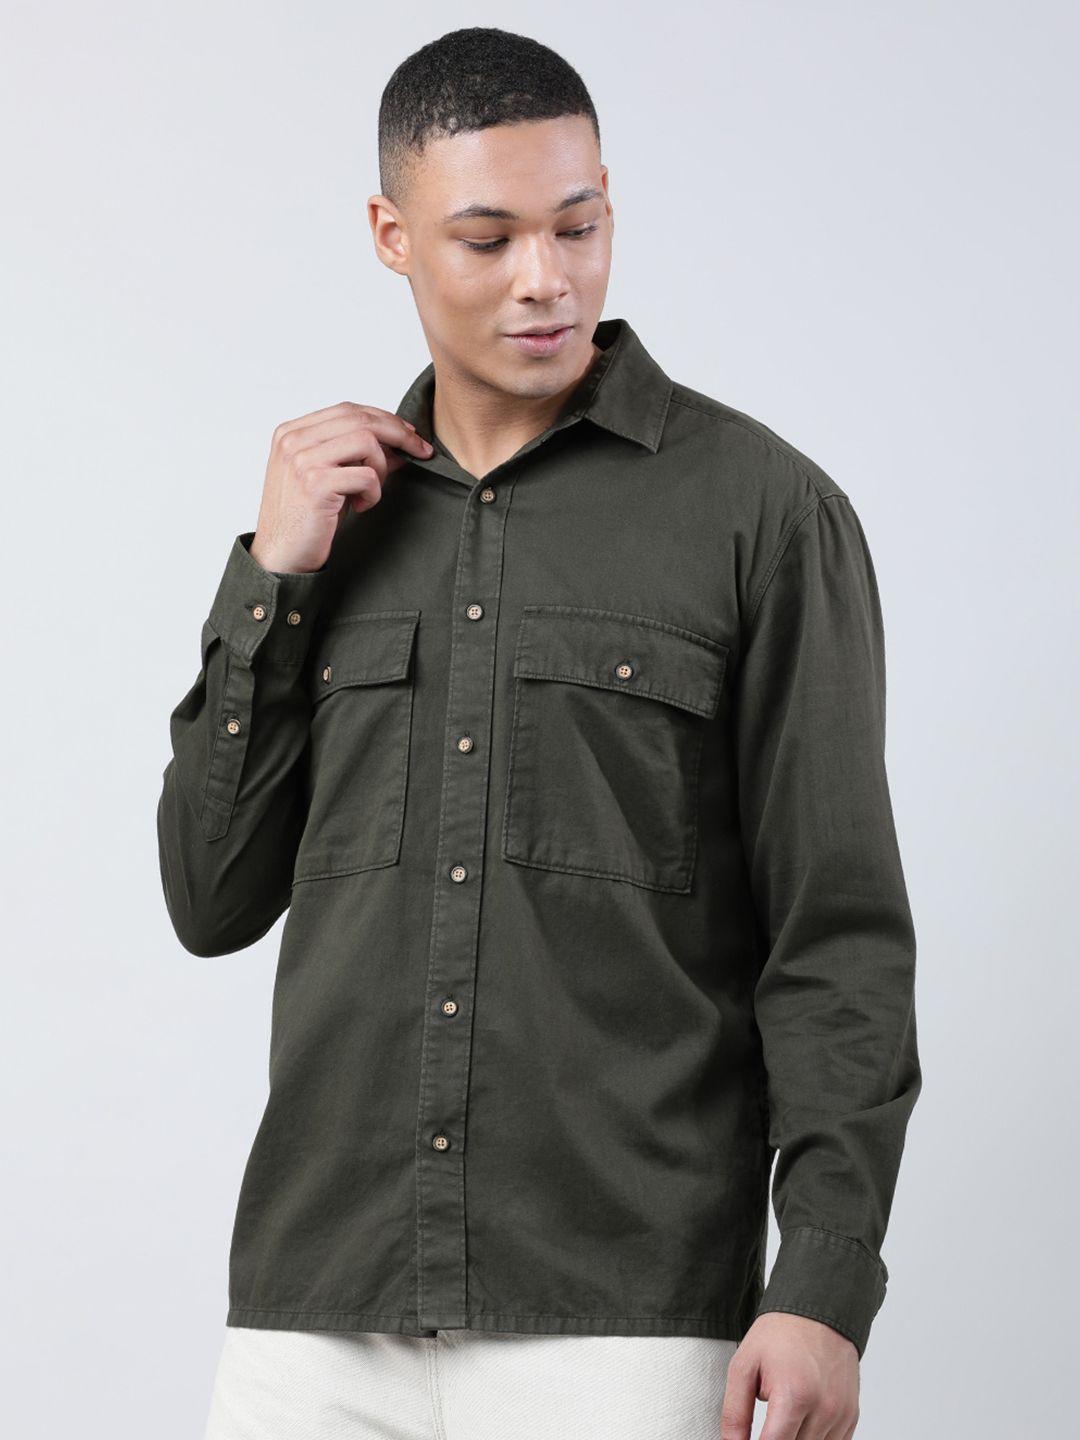 bene-kleed-relaxed-spread-collar-long-sleeves-casual-shirt